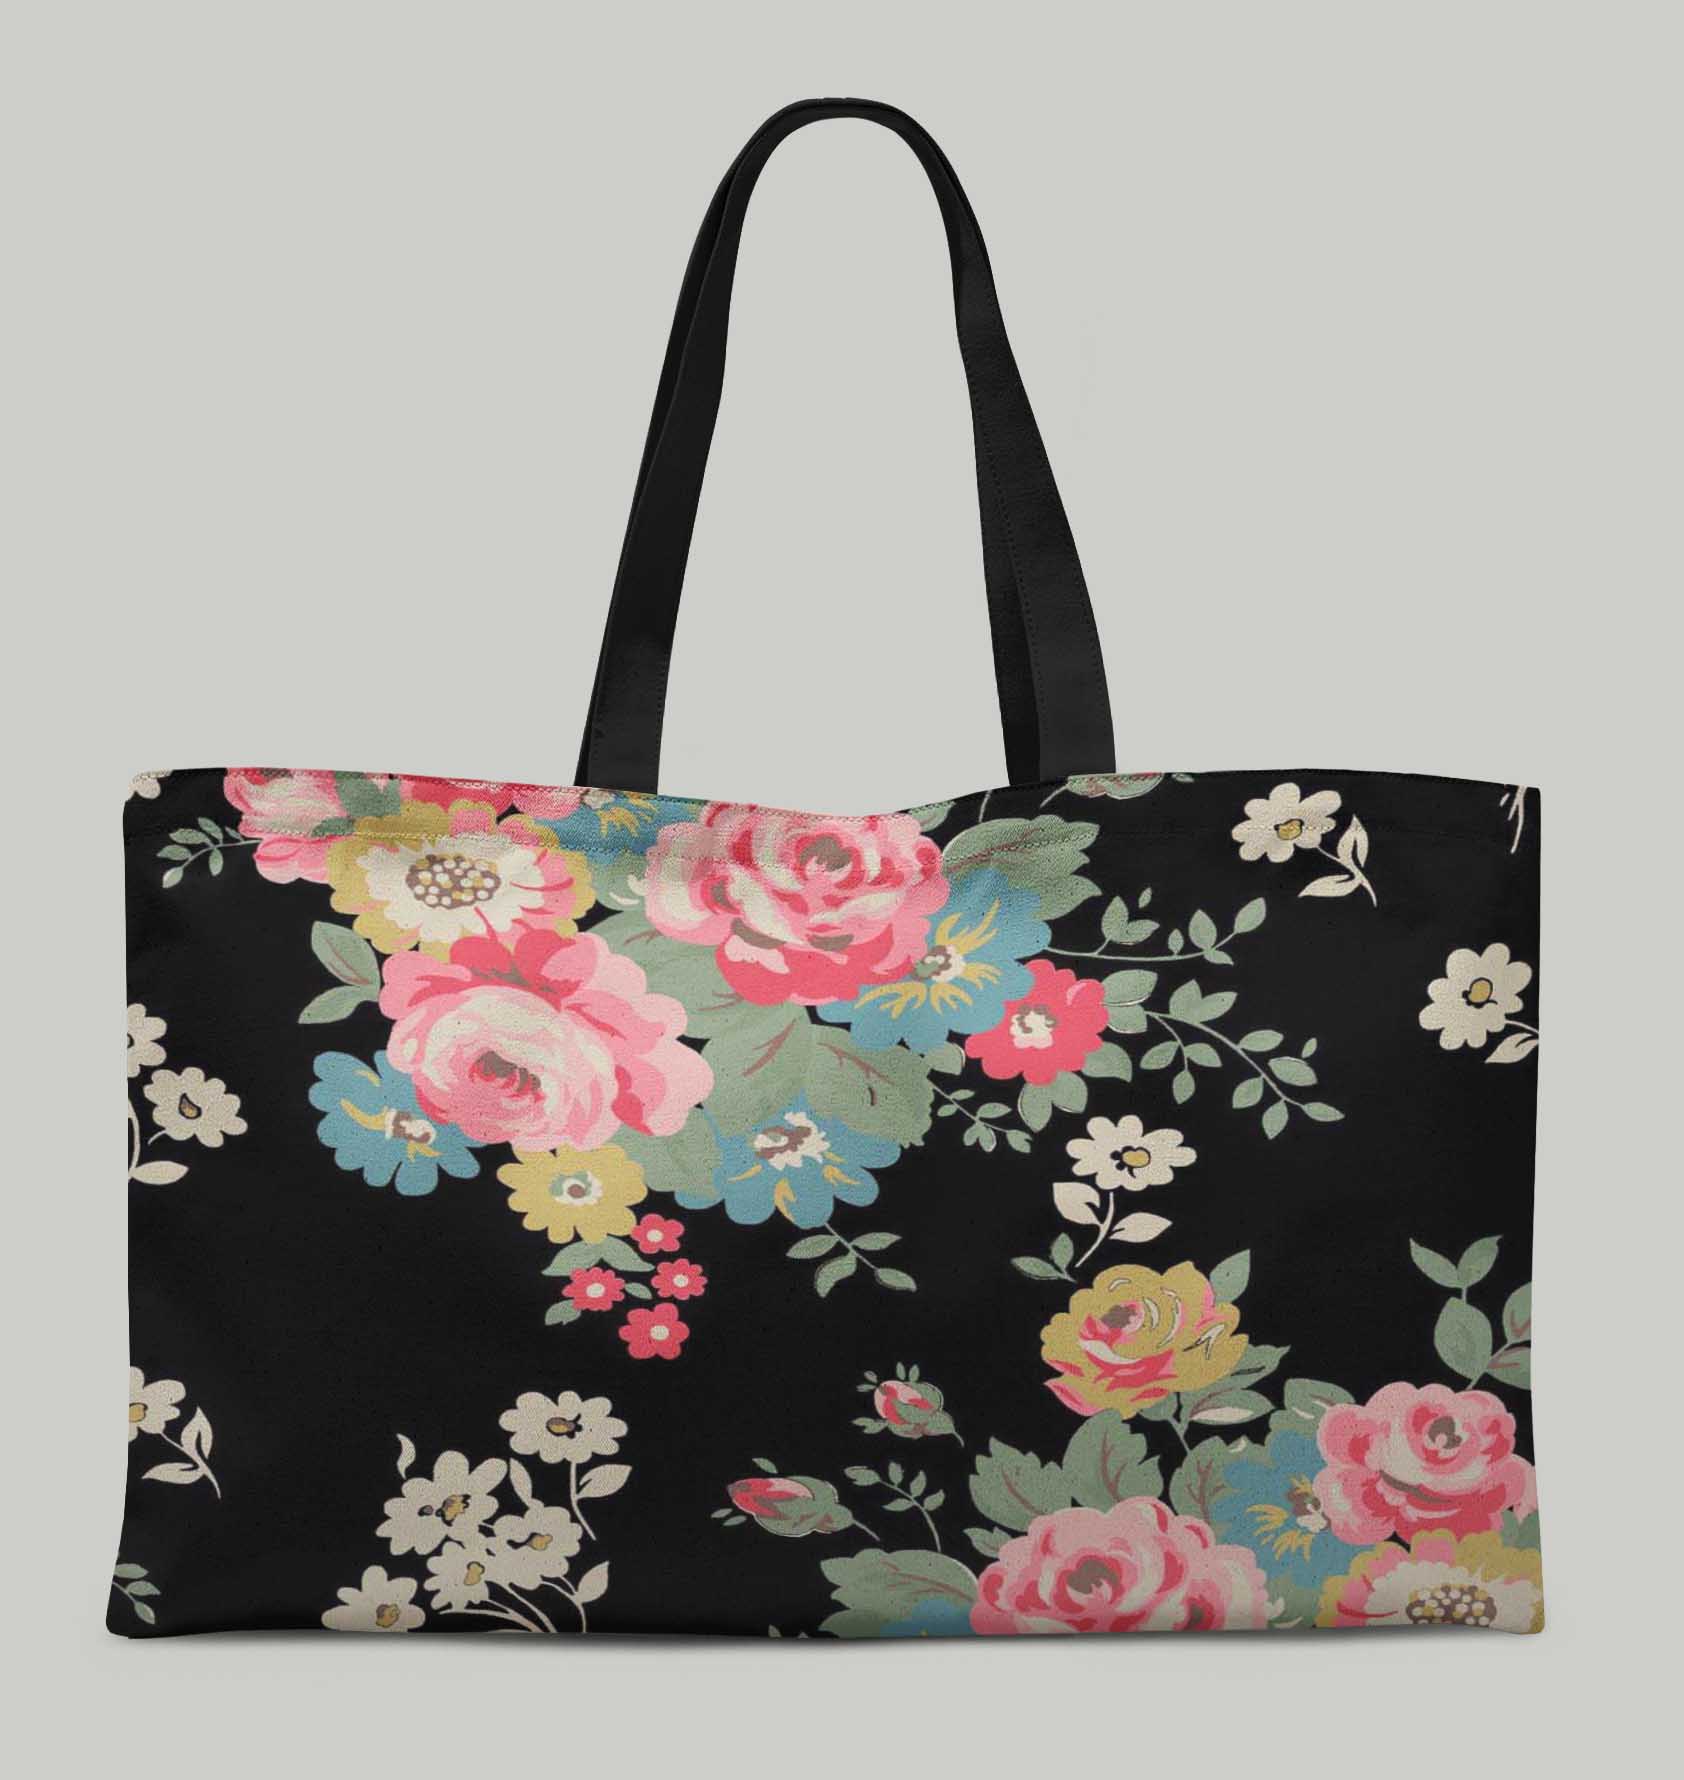 Details about   S4Sassy Floral  Canvas Shopping Tote Bag Carrying Handbag Casual  Bag FL-687D 